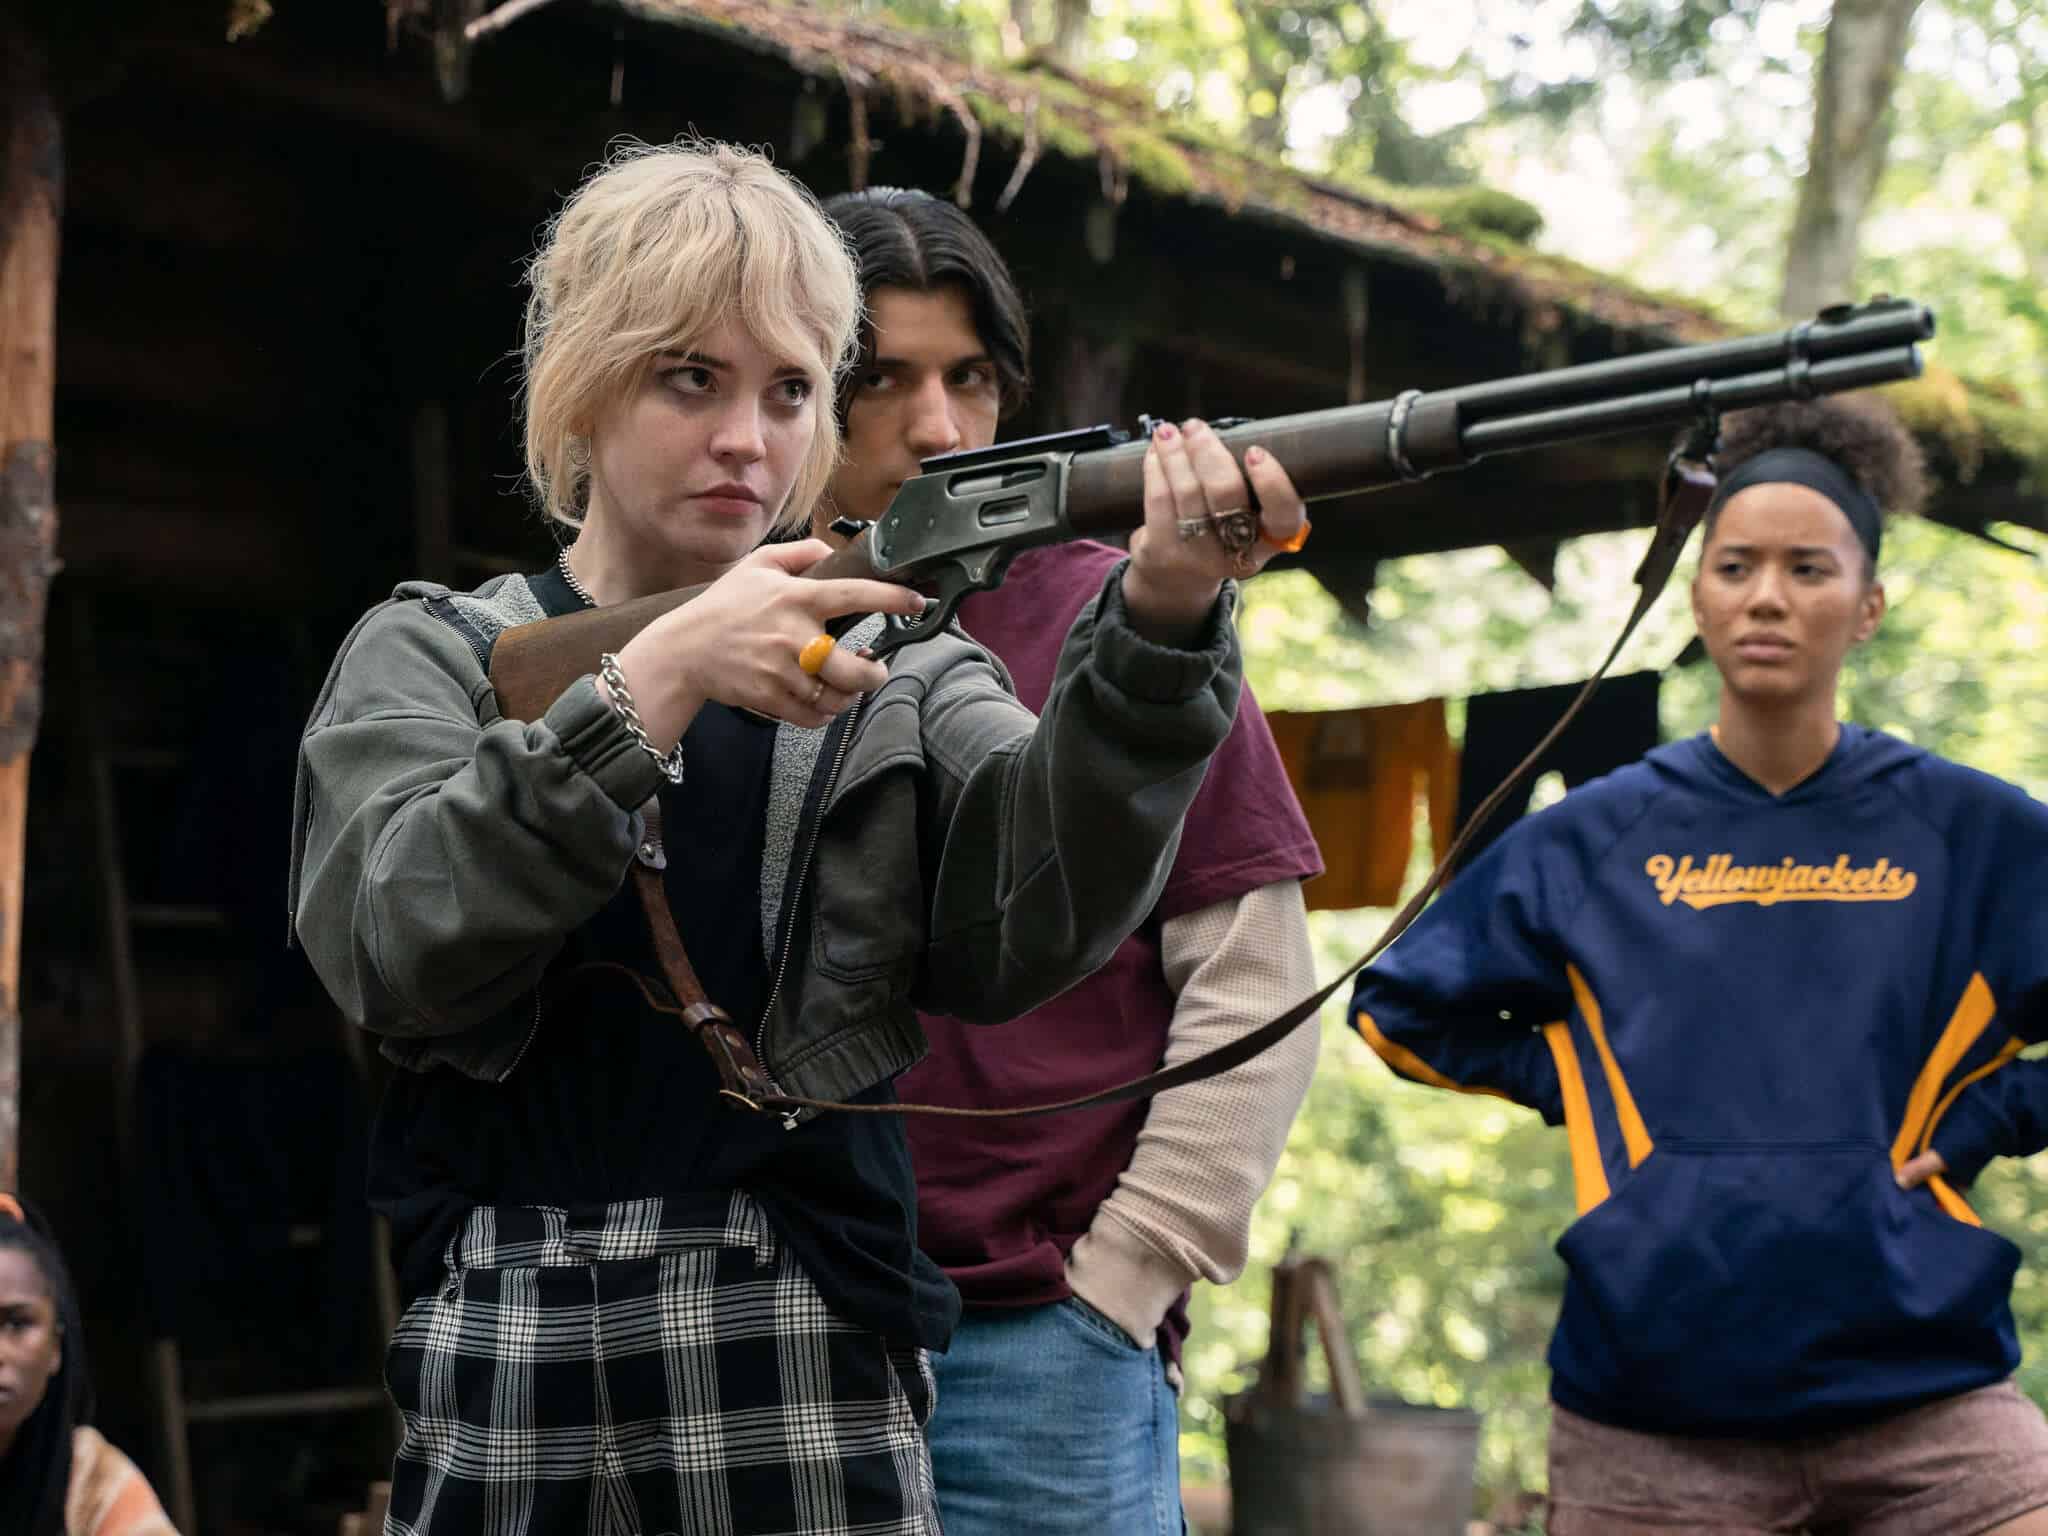 Natalie aiming a shotgun in the woods while Travis and Taissa look on